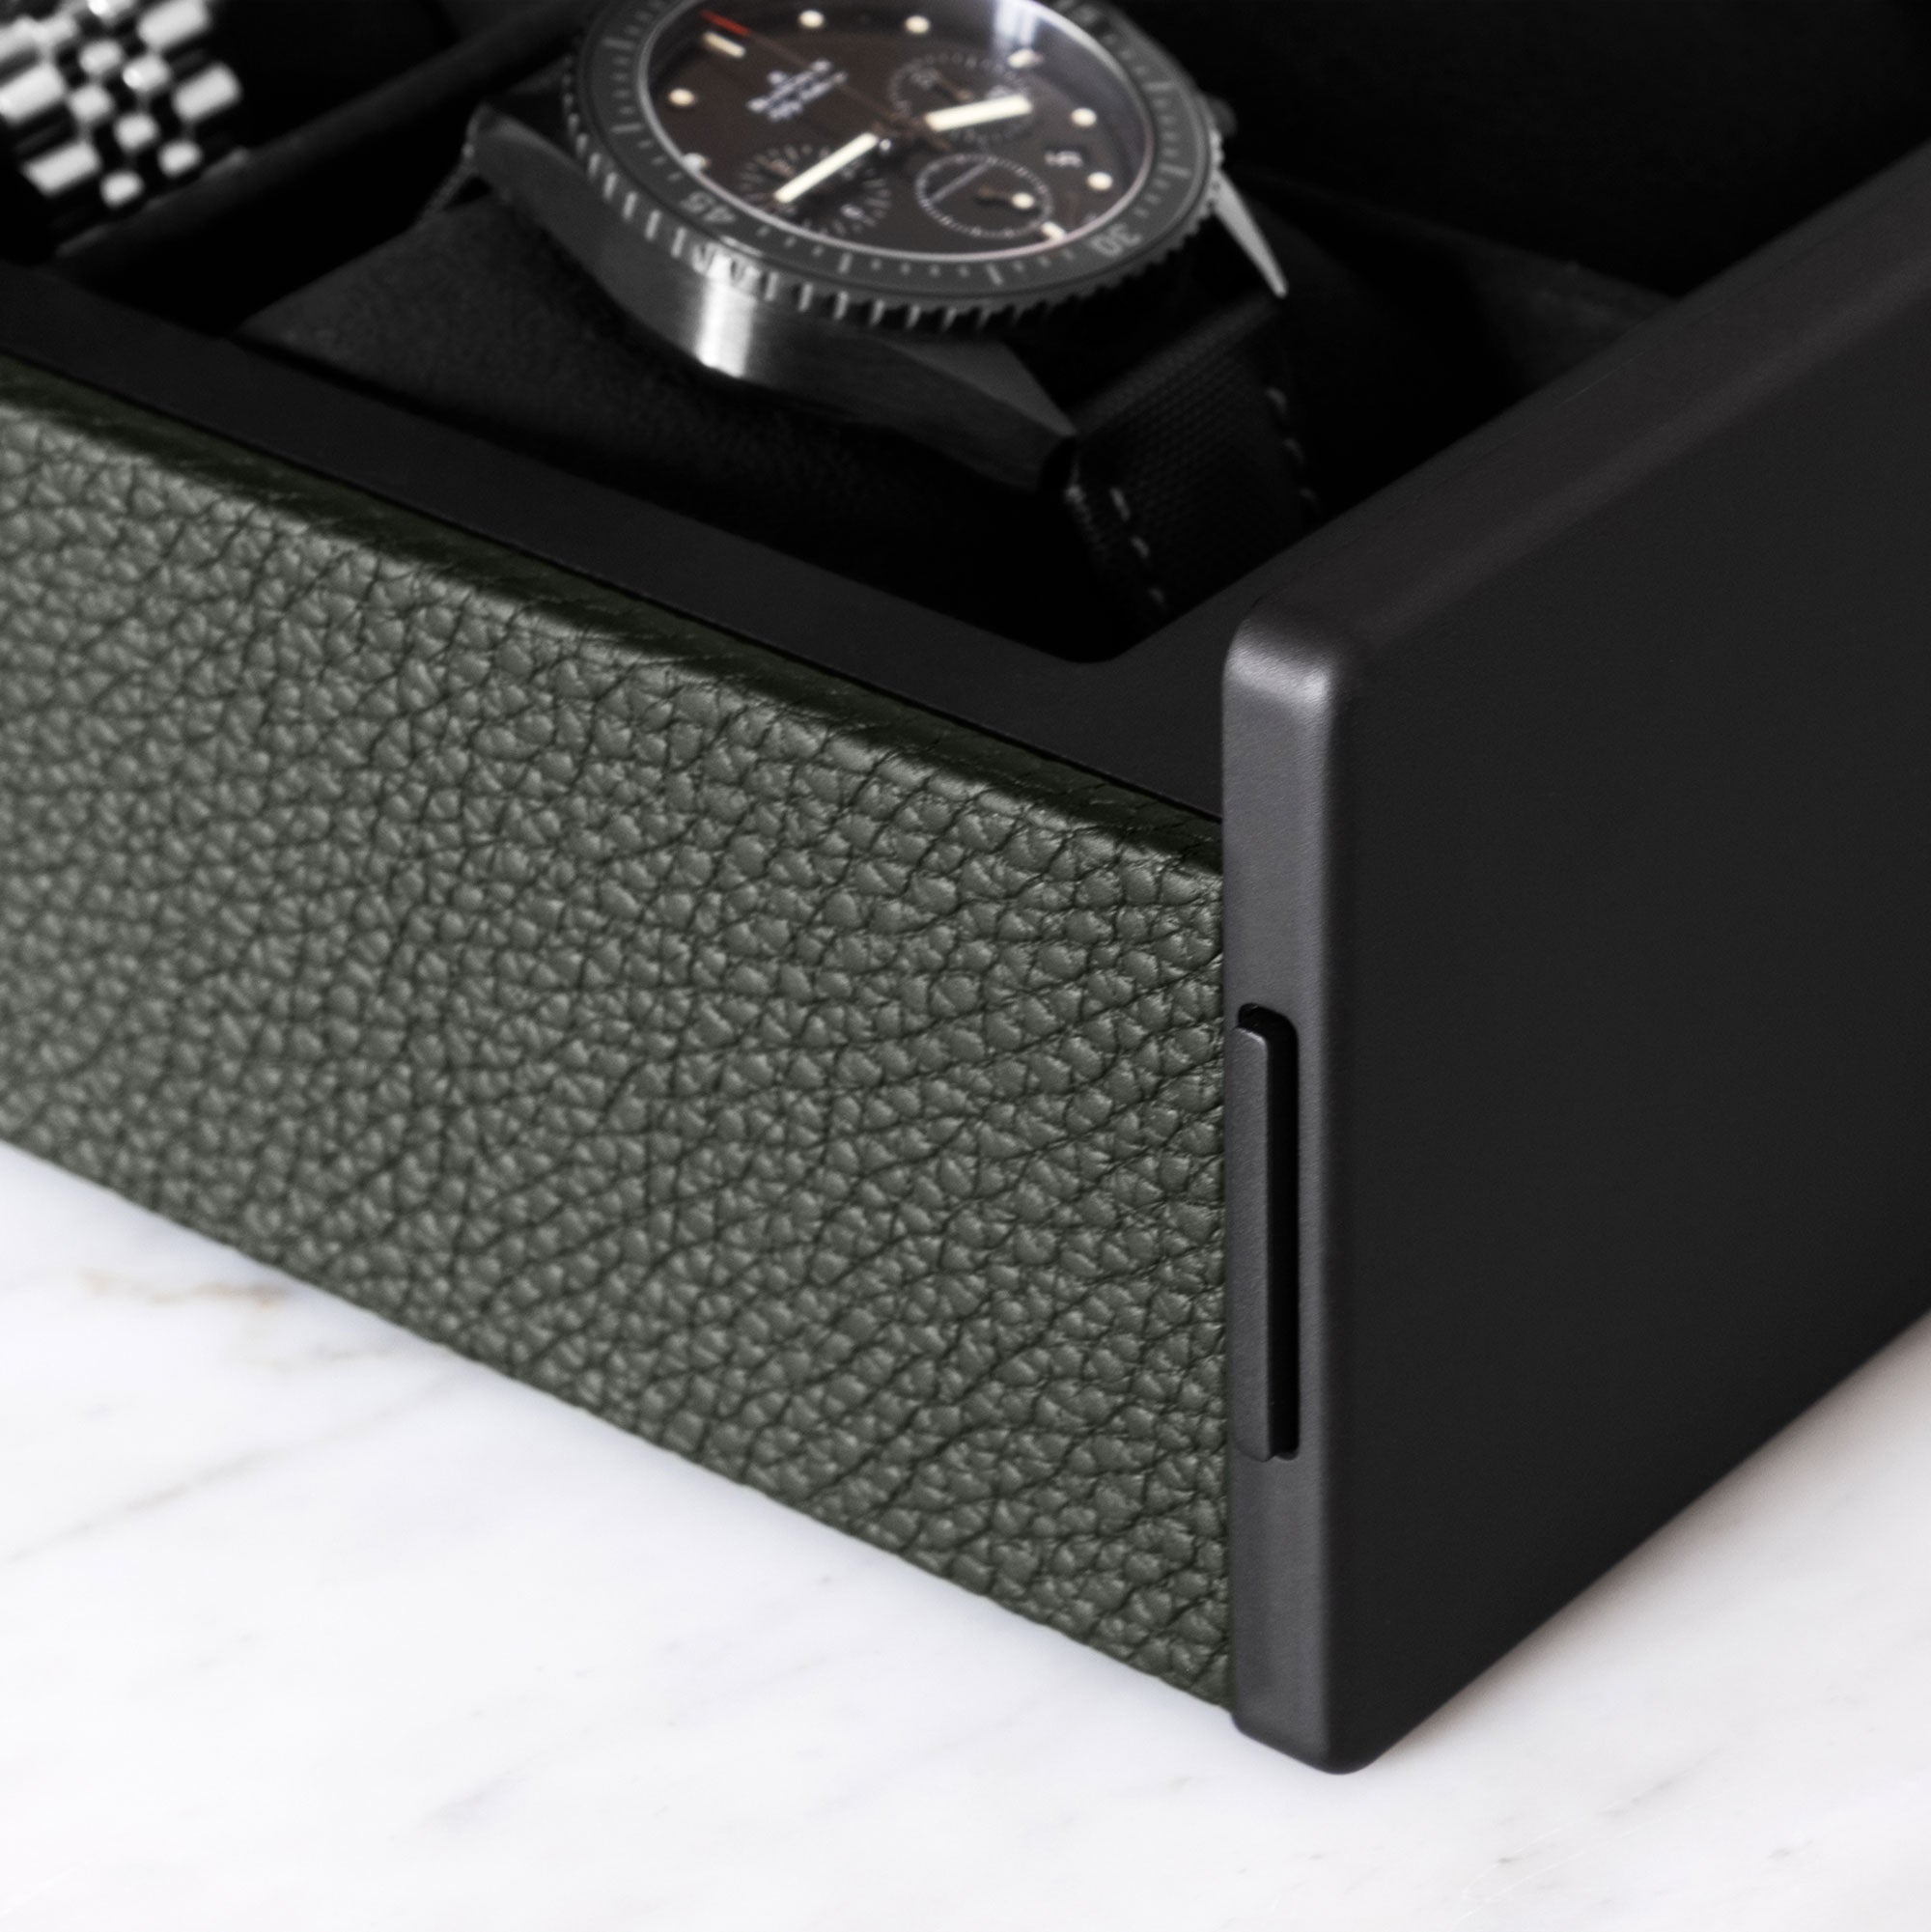 Detail shot of khaki leather and carbon fiber and anodized aluminum of the luxury watch box by Charles Simon